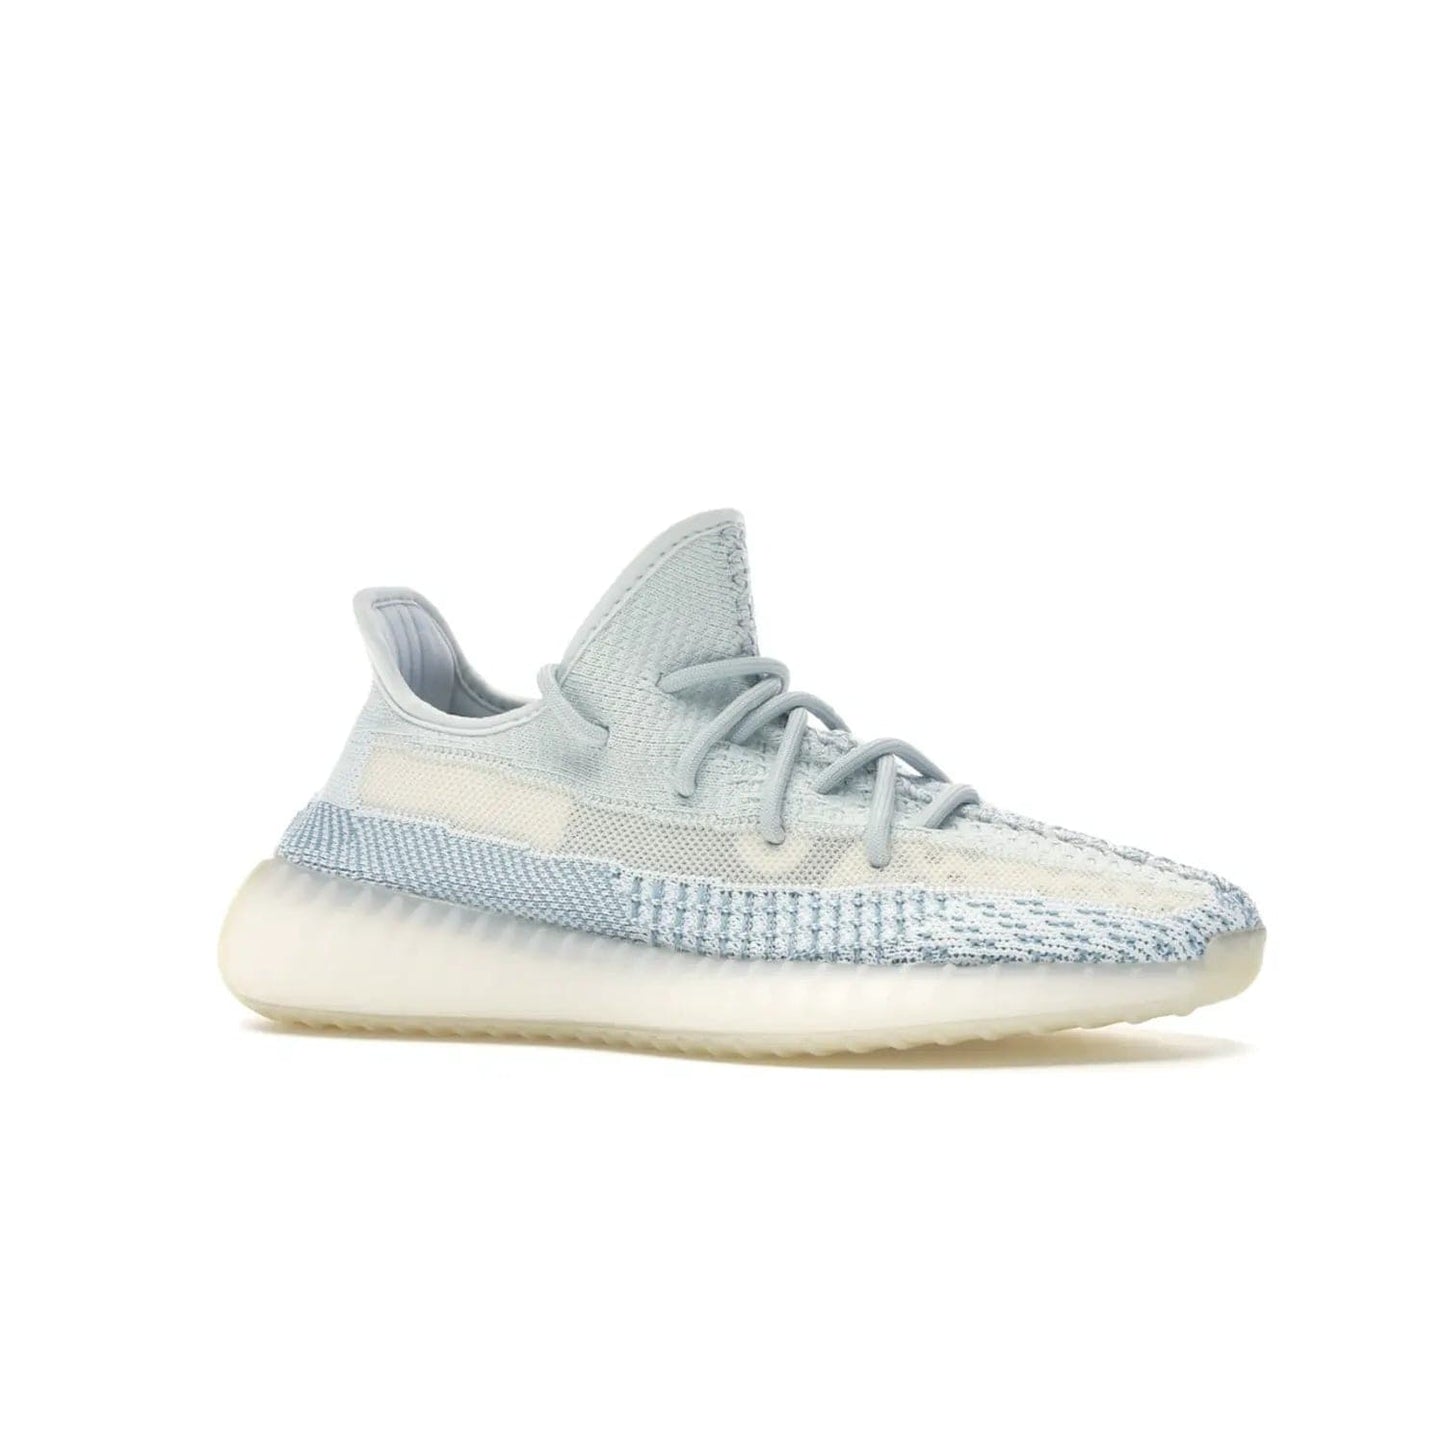 adidas Yeezy Boost 350 V2 Cloud White (Non-Reflective) - Image 3 - Only at www.BallersClubKickz.com - Uniquely designed adidas Yeezy Boost 350 V2 Cloud White (Non-Reflective) with a Primeknit upper in shades of cream and blue with a contrasting hard sole. A fashion-forward sneaker with a transparent strip and blue-and-white patterns.